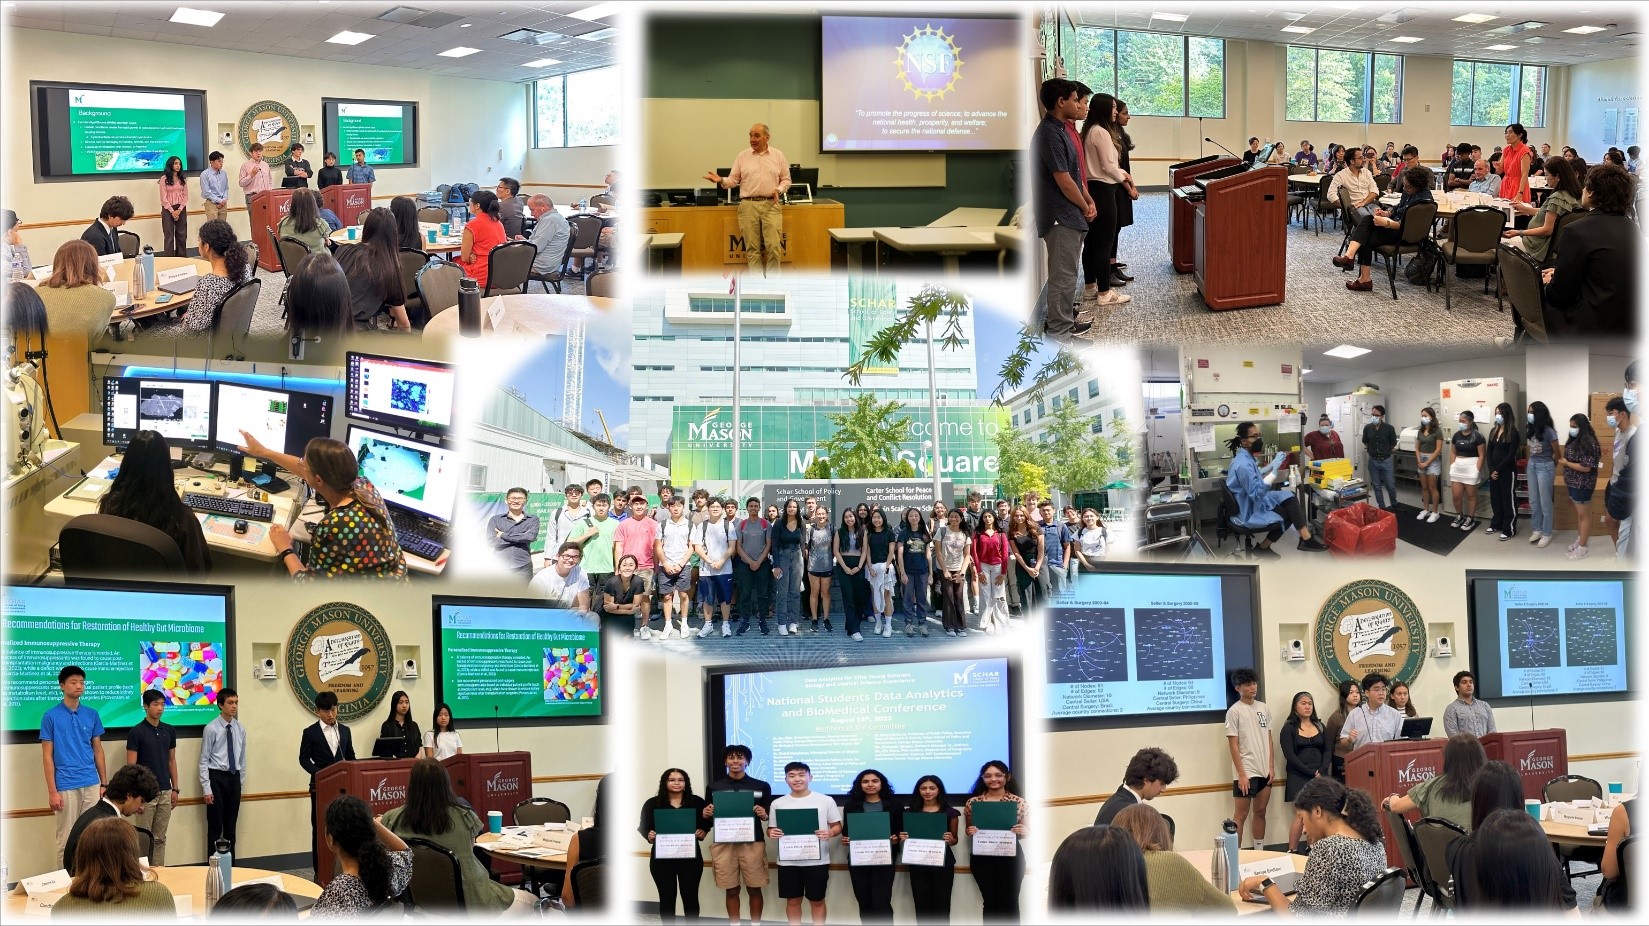 A photo collage of students in classrooms, presenting, and in front of Van Metre Hall